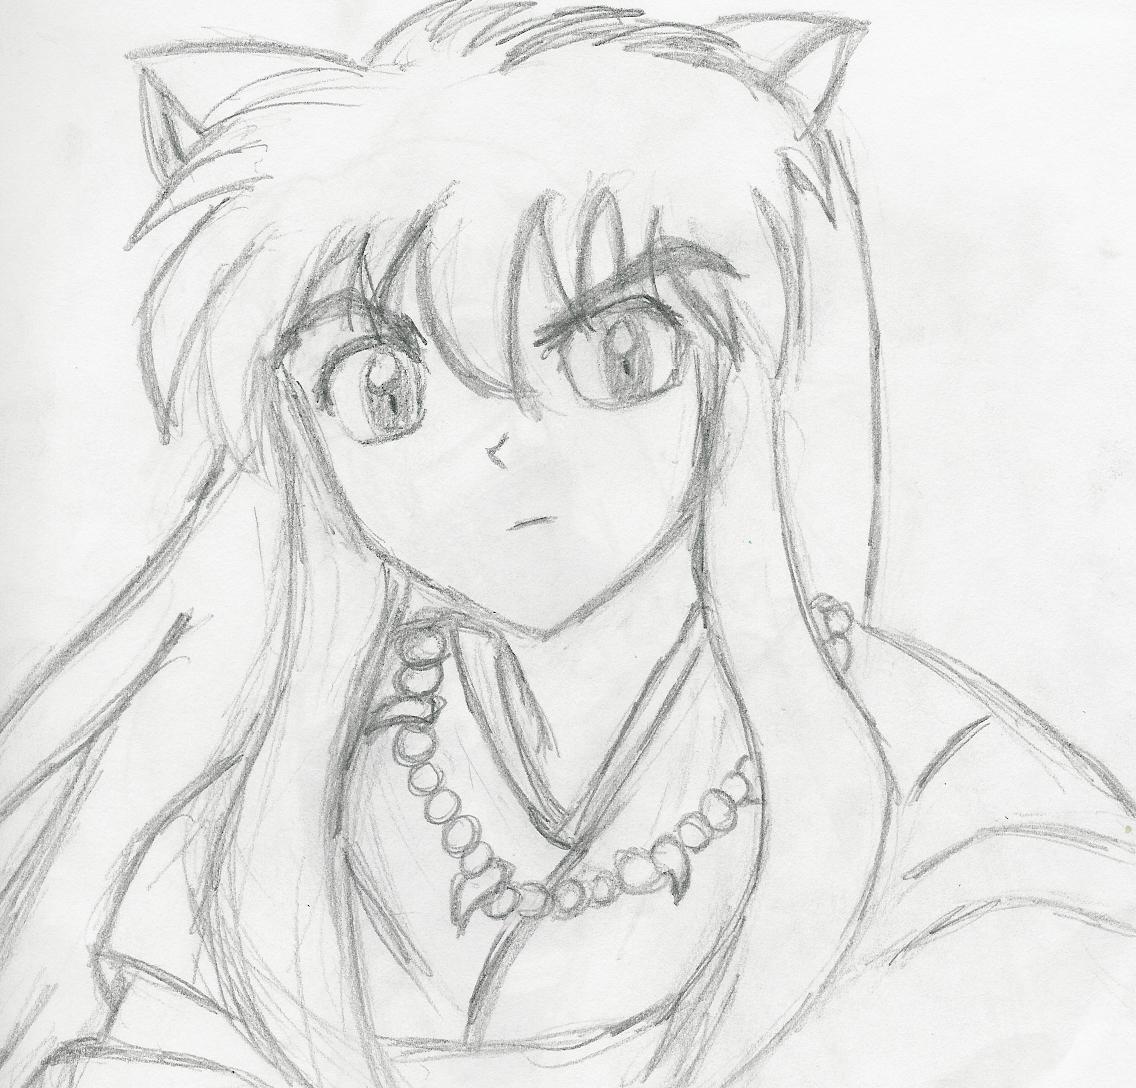 Inuyasha pencil sketch by G_A_M